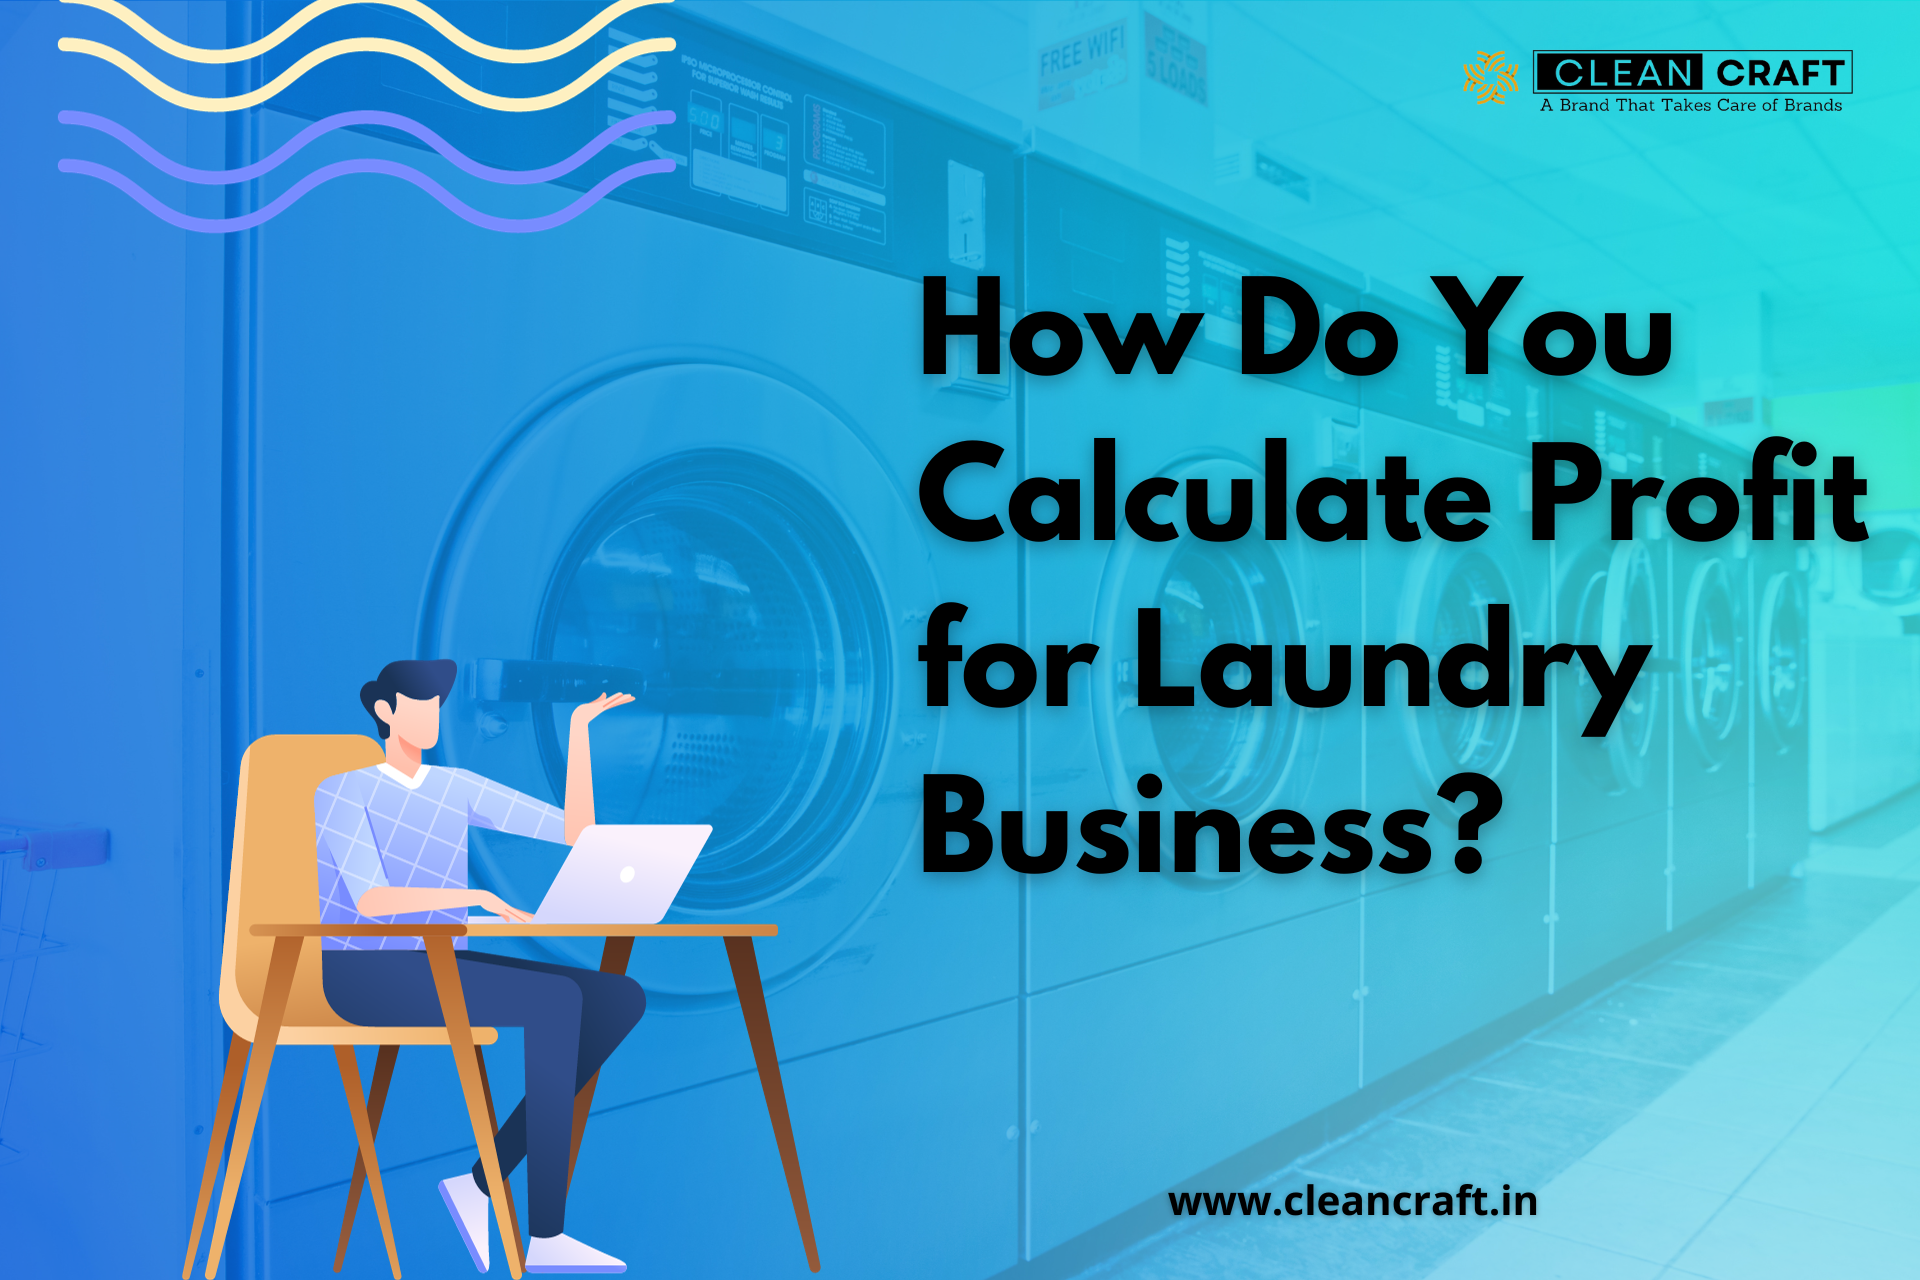 How Do You Calculate Profit for Laundry Business?